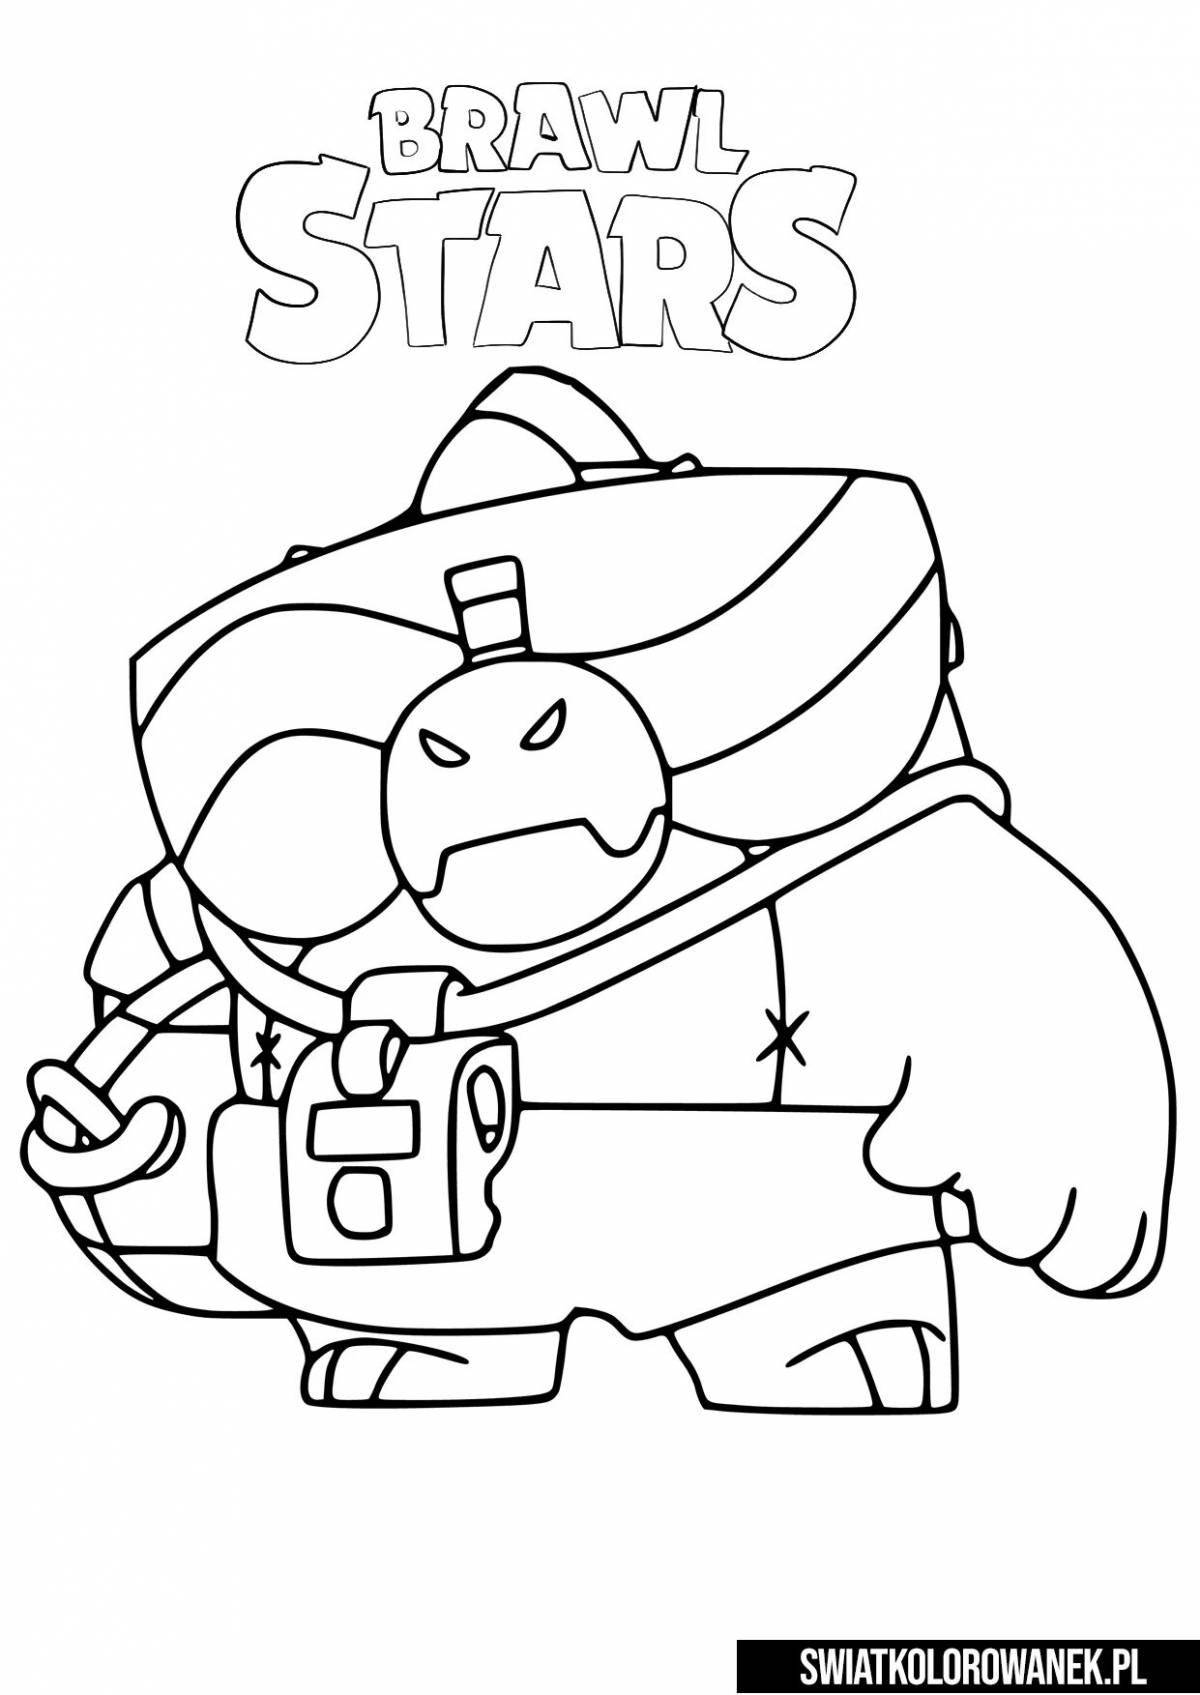 Colorful browstars coloring pages for kids